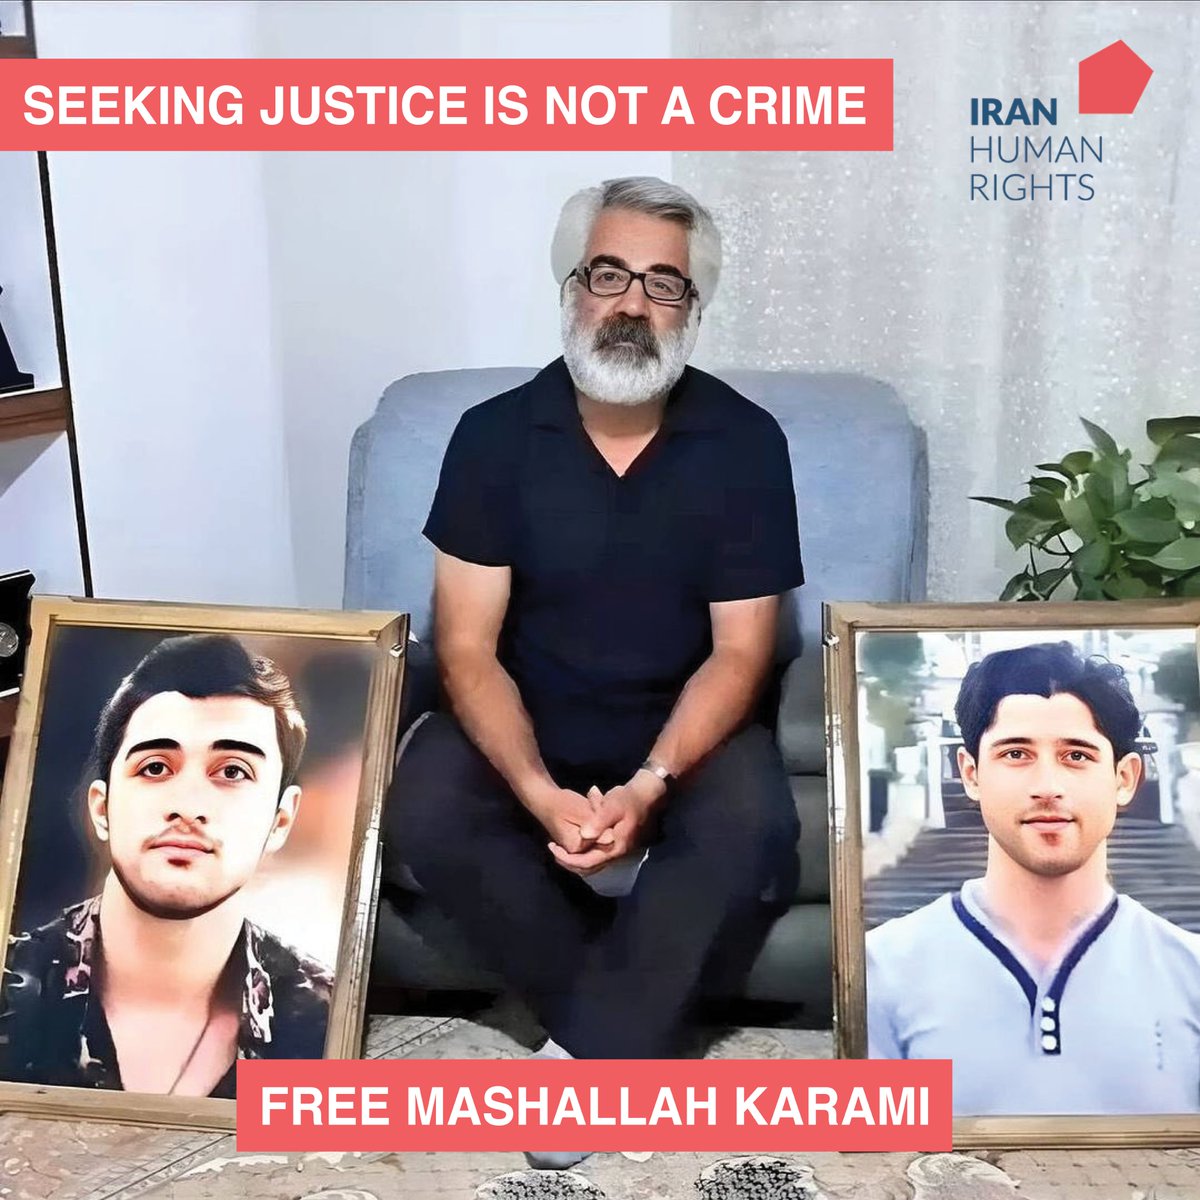 Tonight, Iranians are posting in support of #MashallahKarami ahead of his trial tomorrow for seeking justice for his executed protester son, Mohammad Mehdi Karami. 

Mr Karami is facing charges of 'propaganda against the system” and “assembly and collusion against national